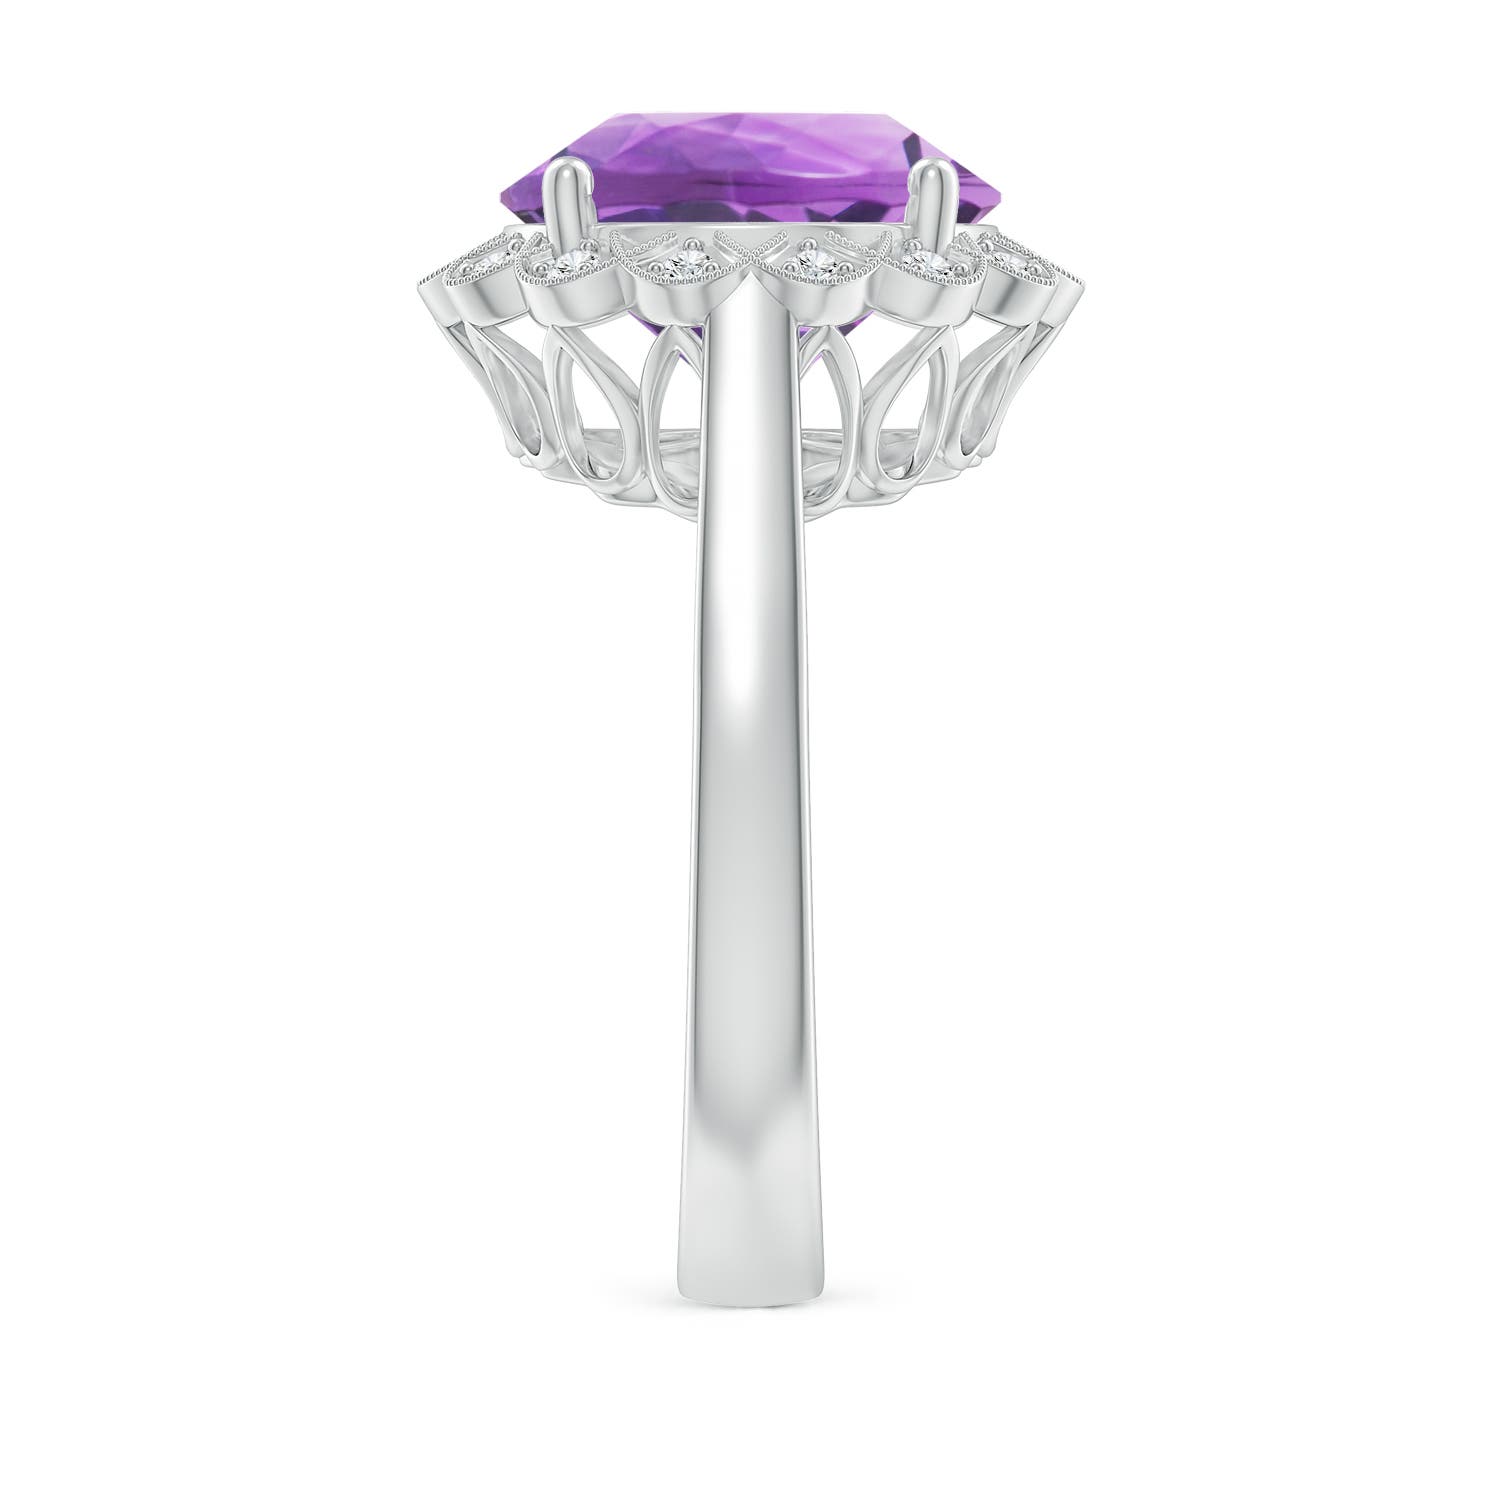 A - Amethyst / 4.86 CT / 14 KT White Gold